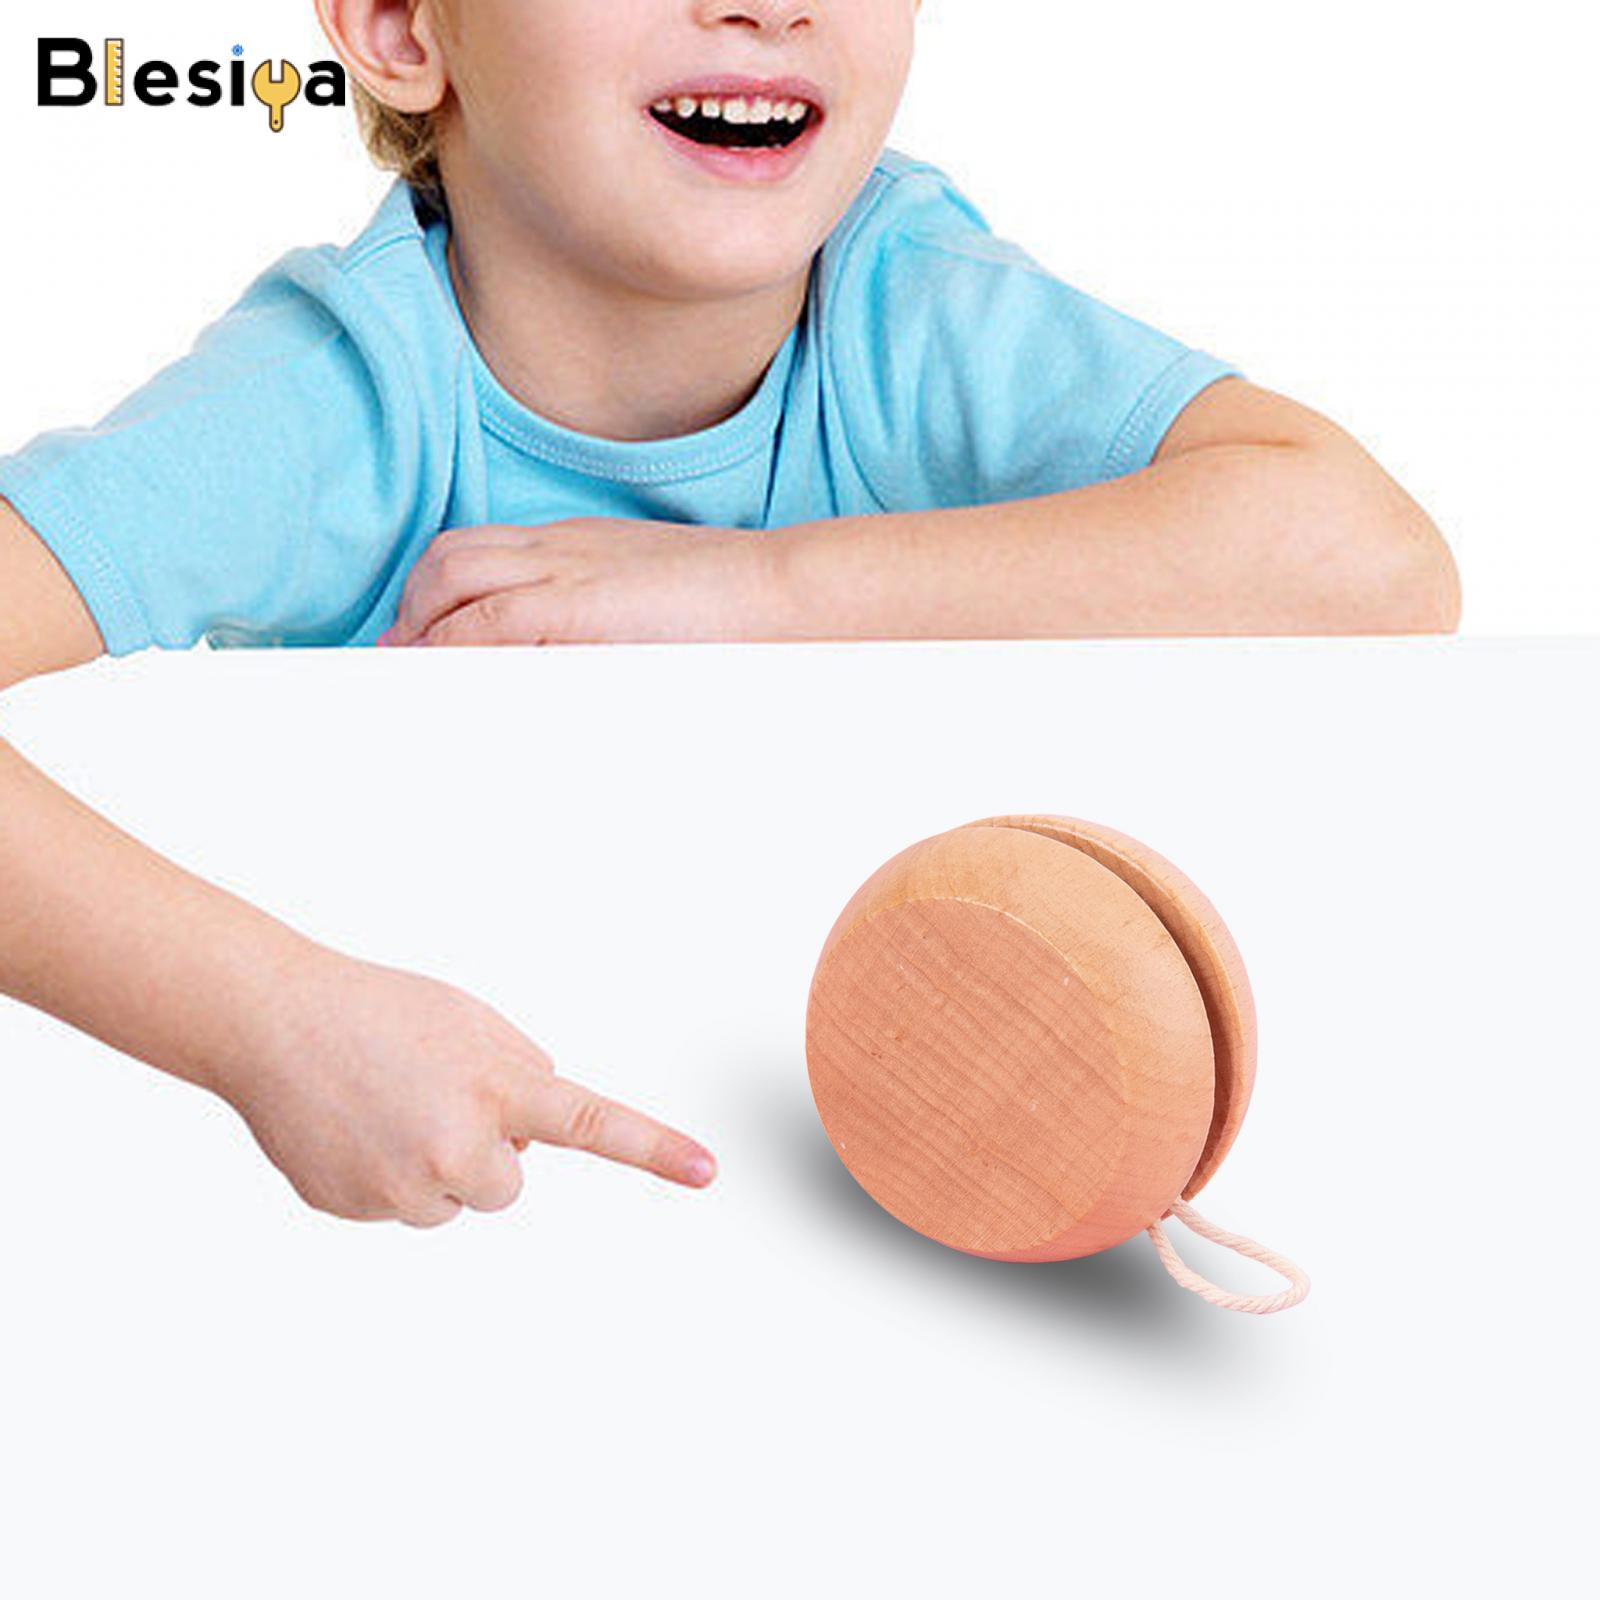 Blesiya Wooden Beginner Yoyo Portable Small Size for Home Outdoor Holiday